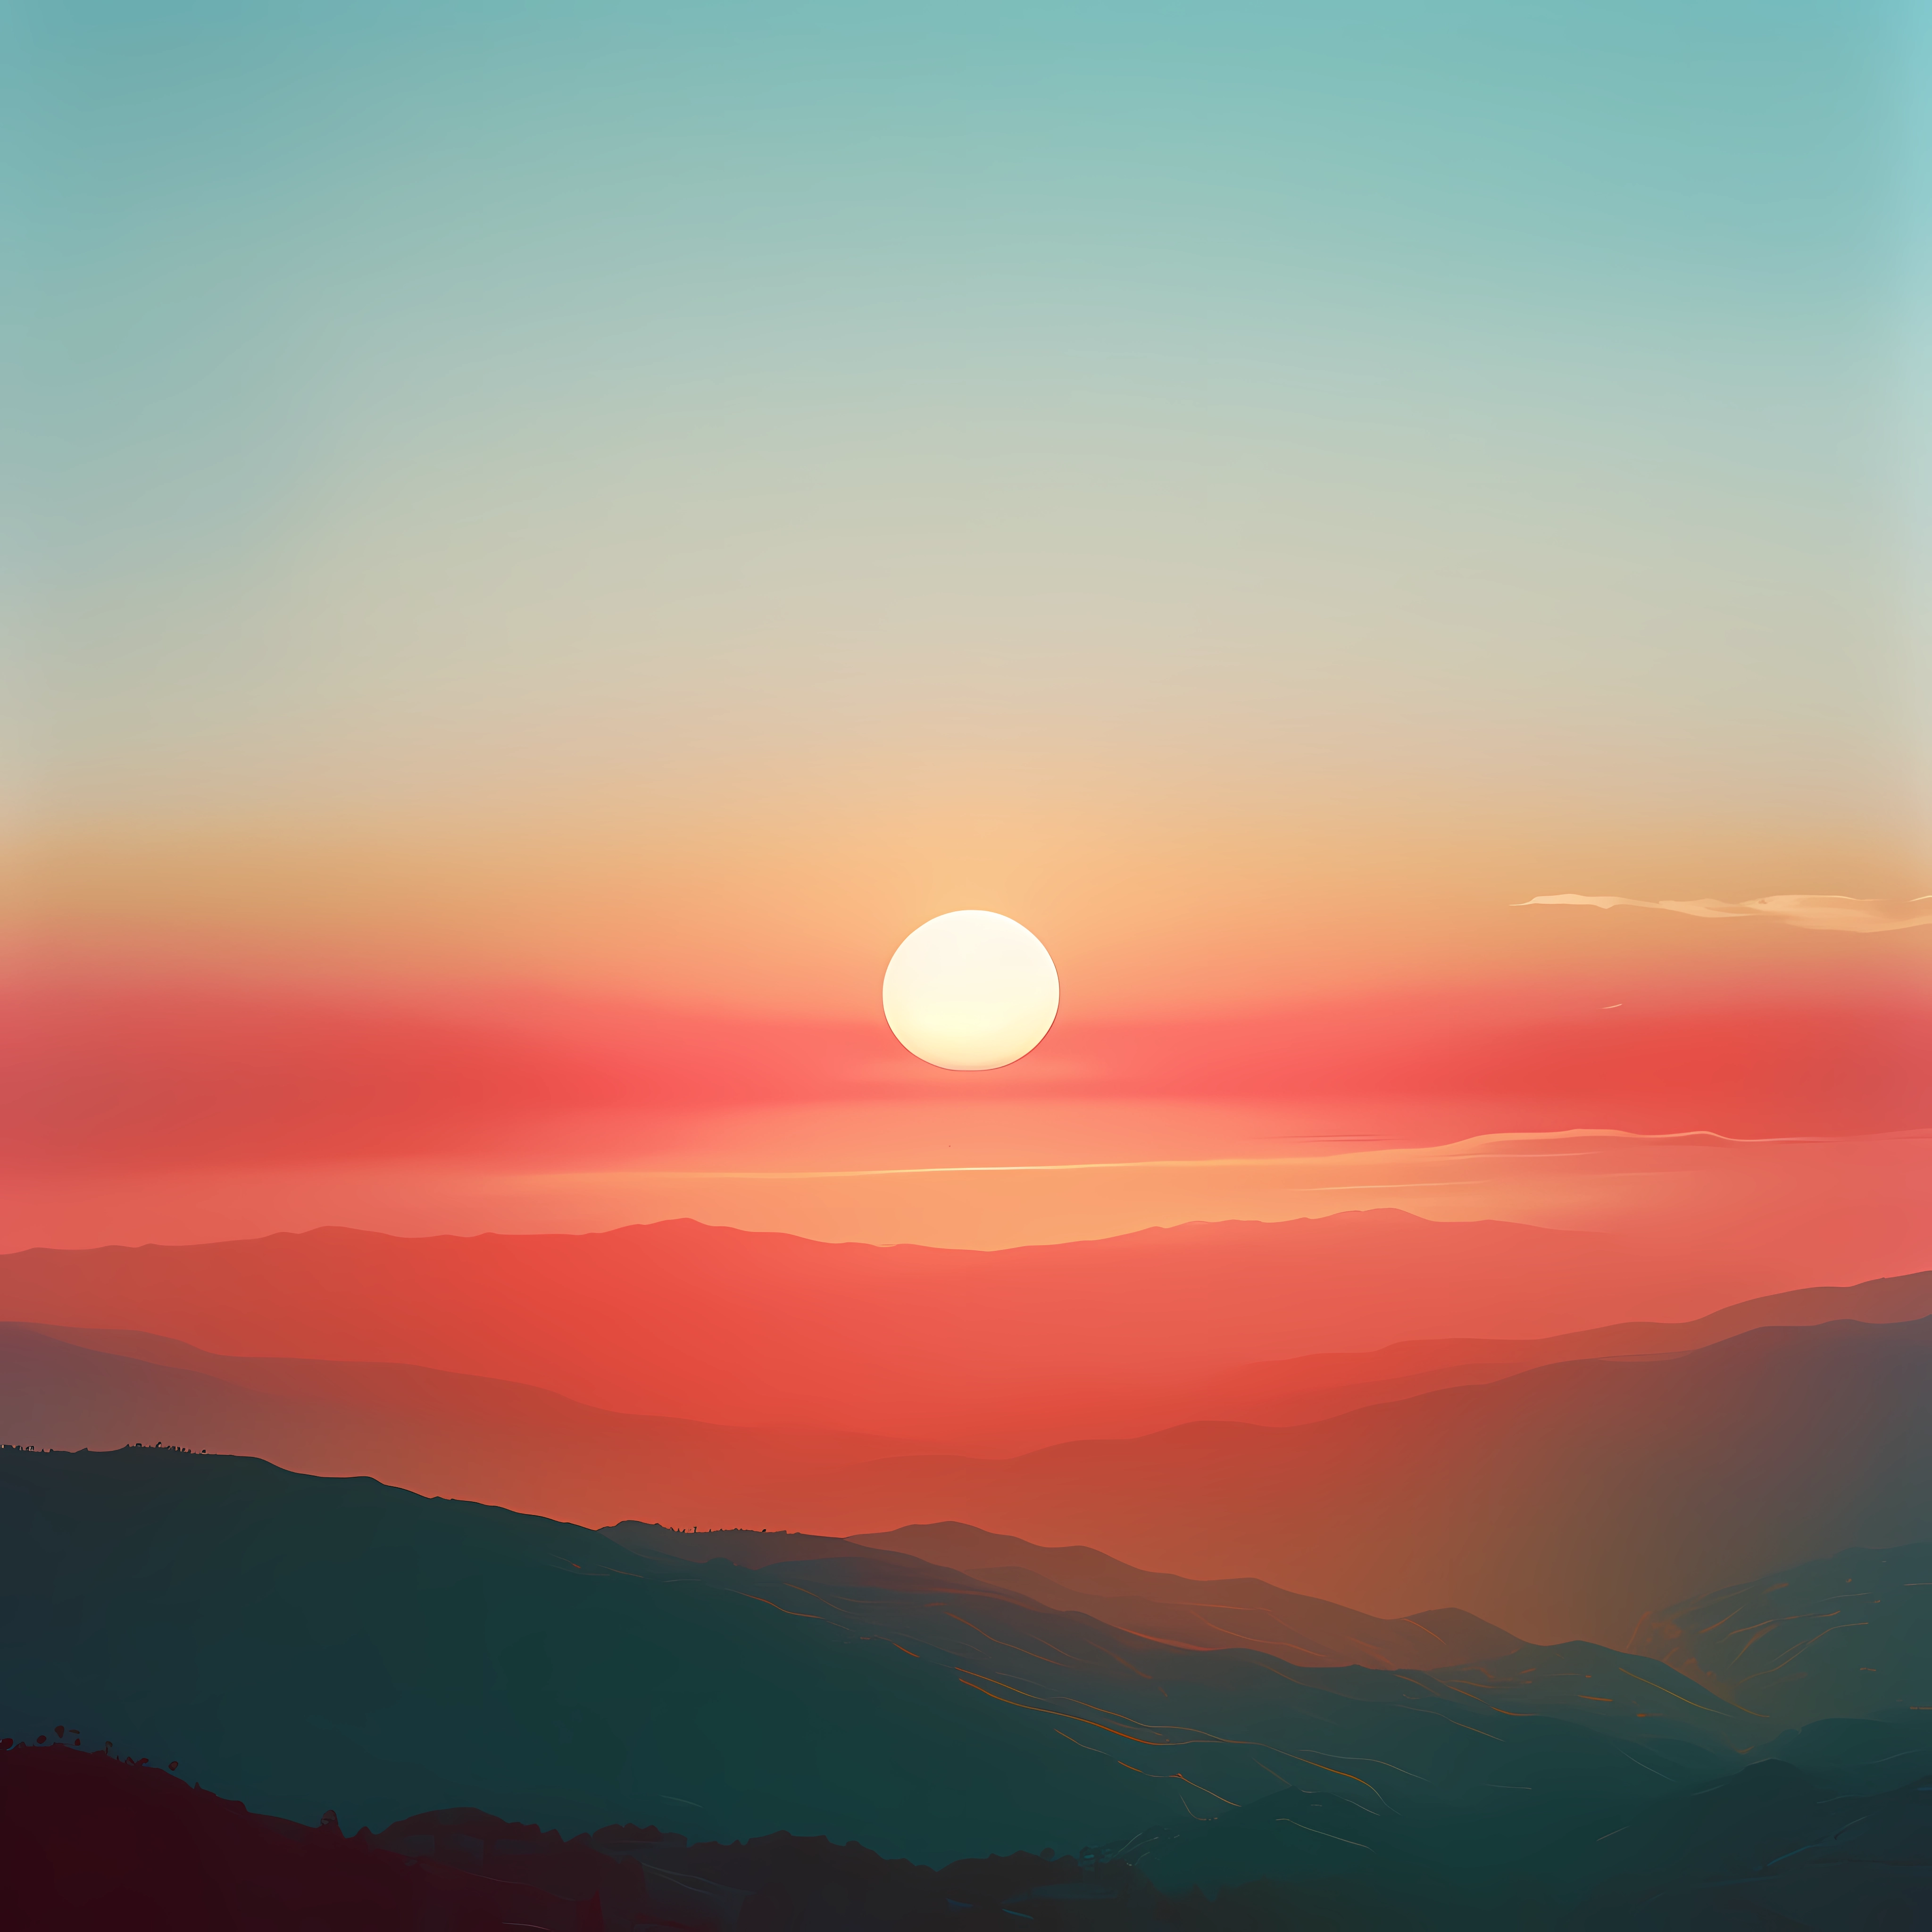 Stunning avatar of a sunrise over the mountains, with vibrant hues of red and orange painting the horizon.